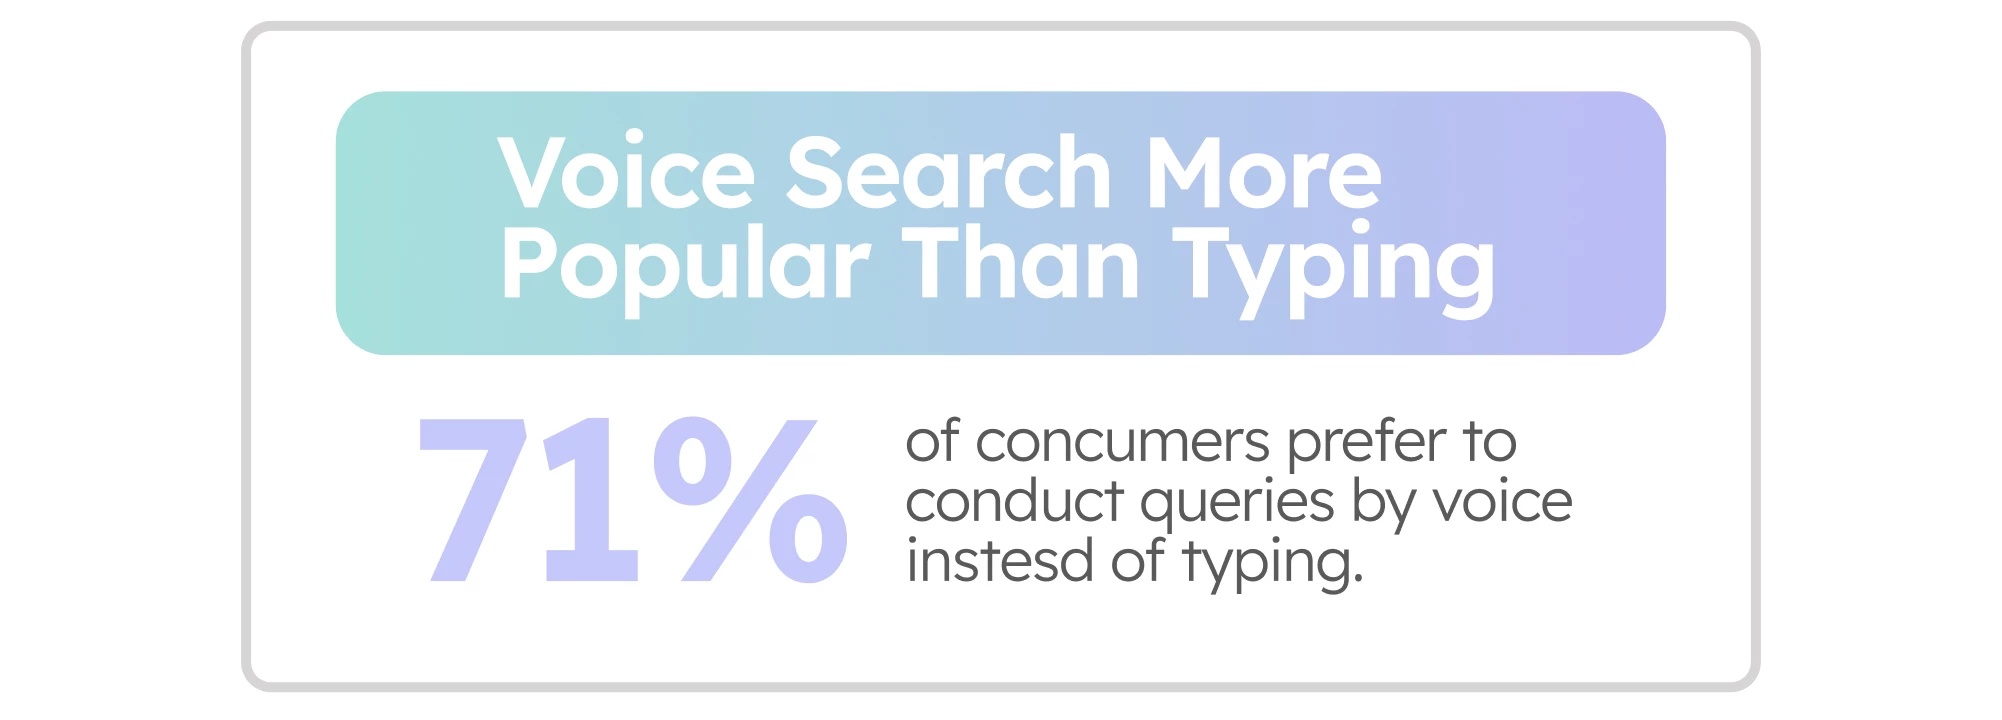 Voice search more popular than typing